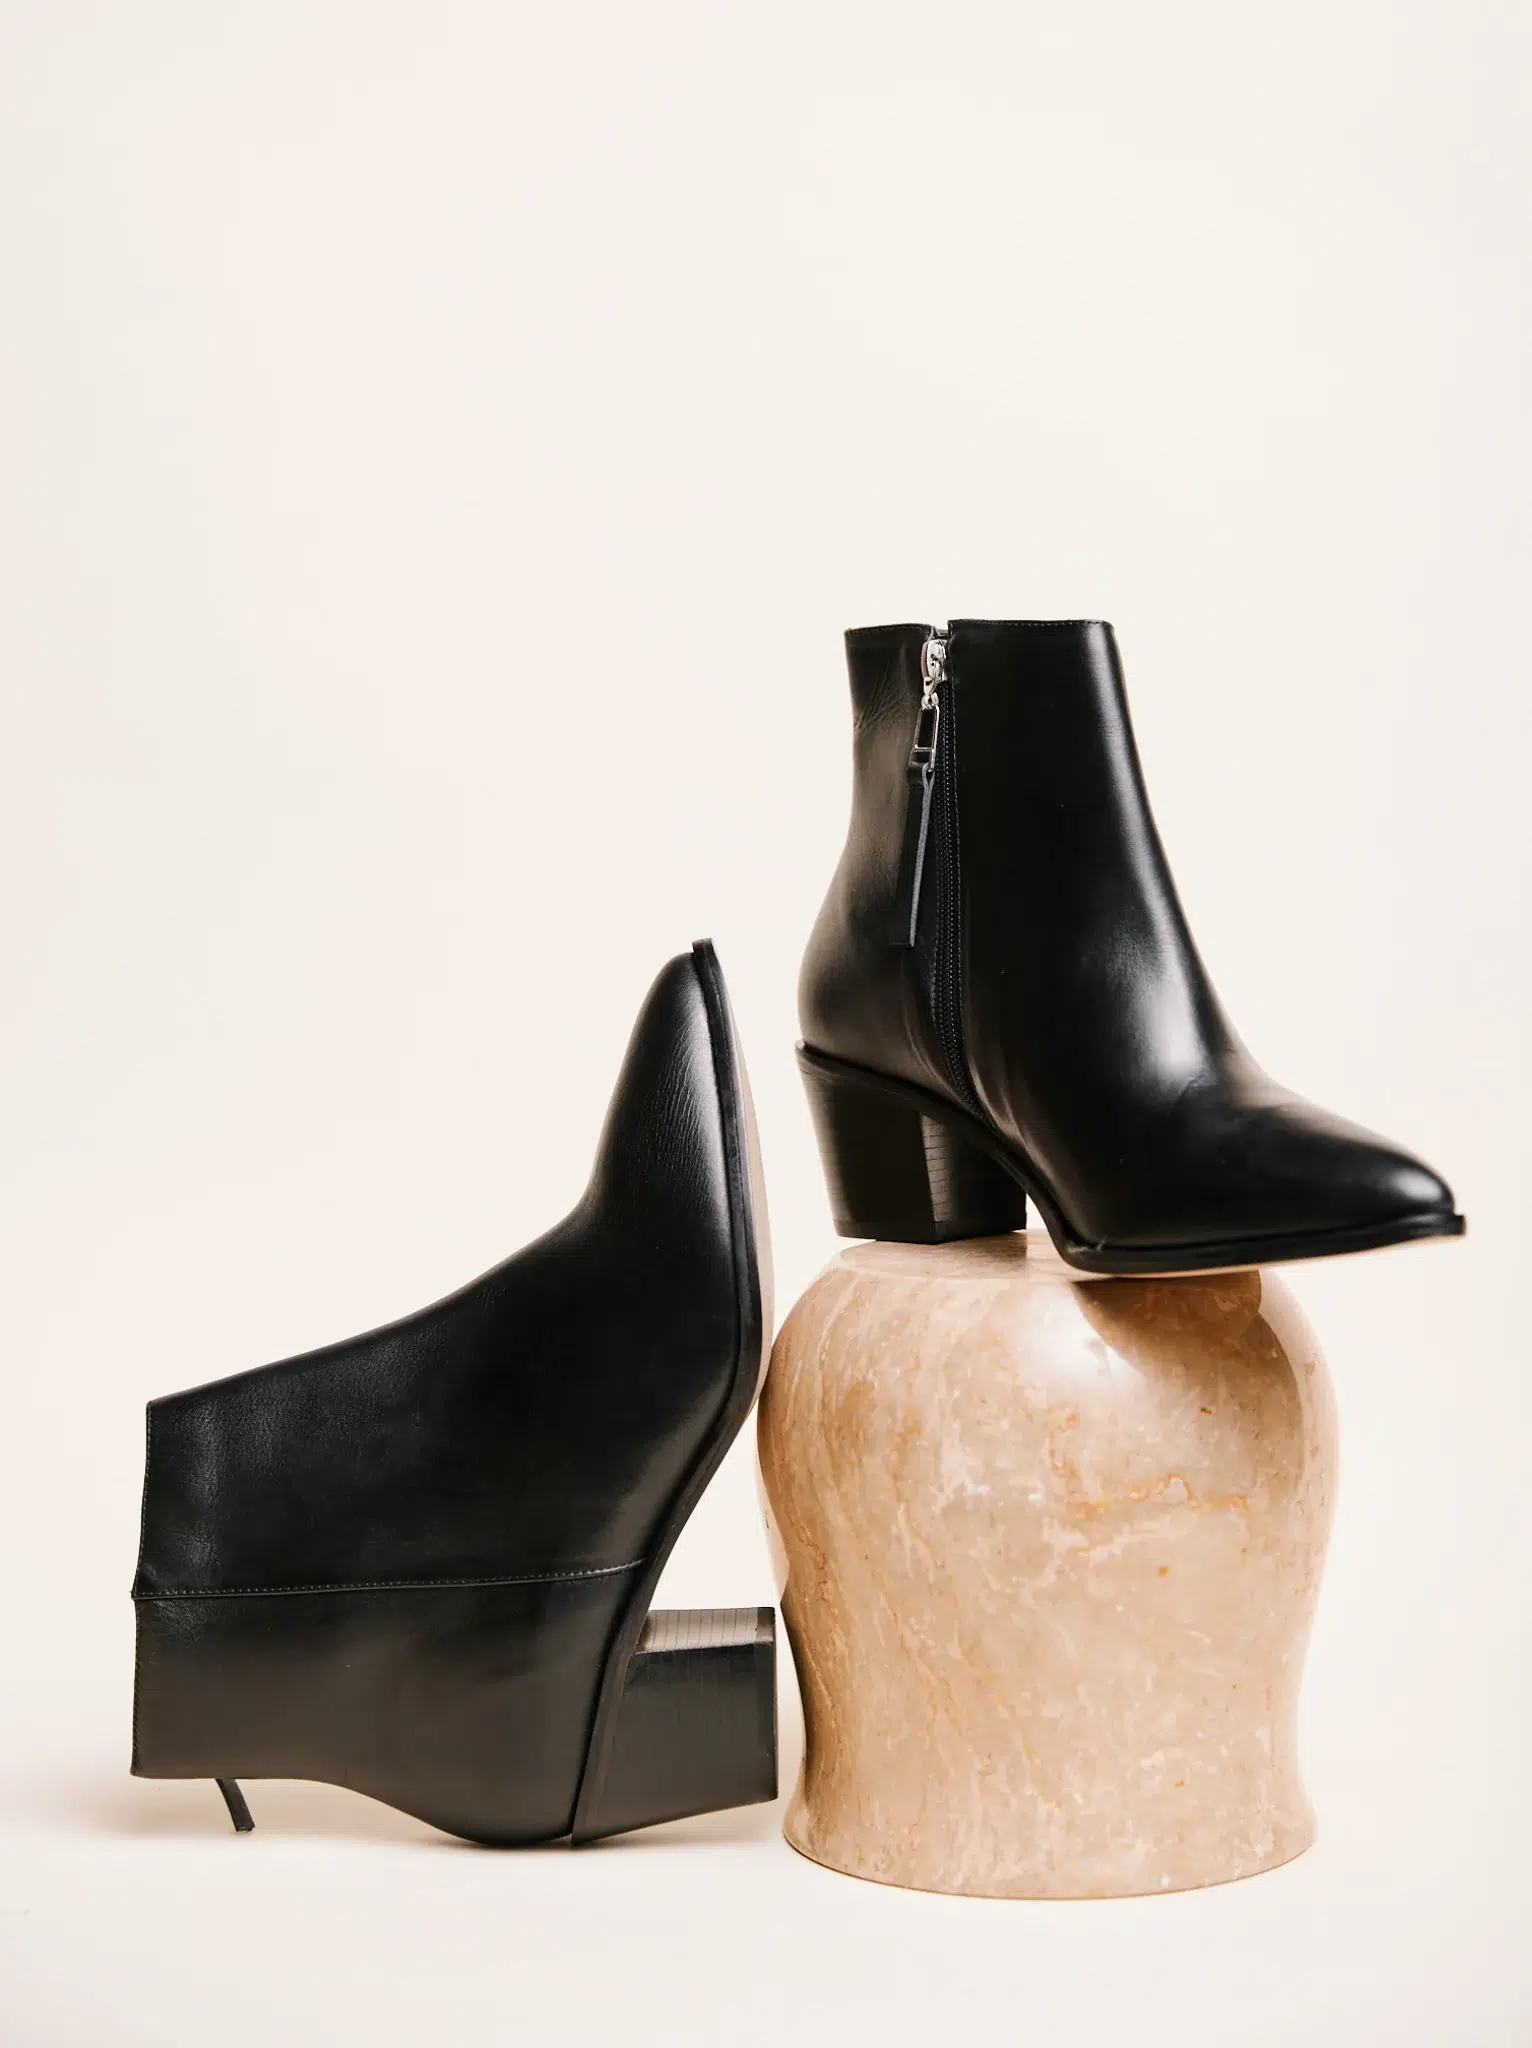 A pair of black leather ABLE sustainable ankle boots. 